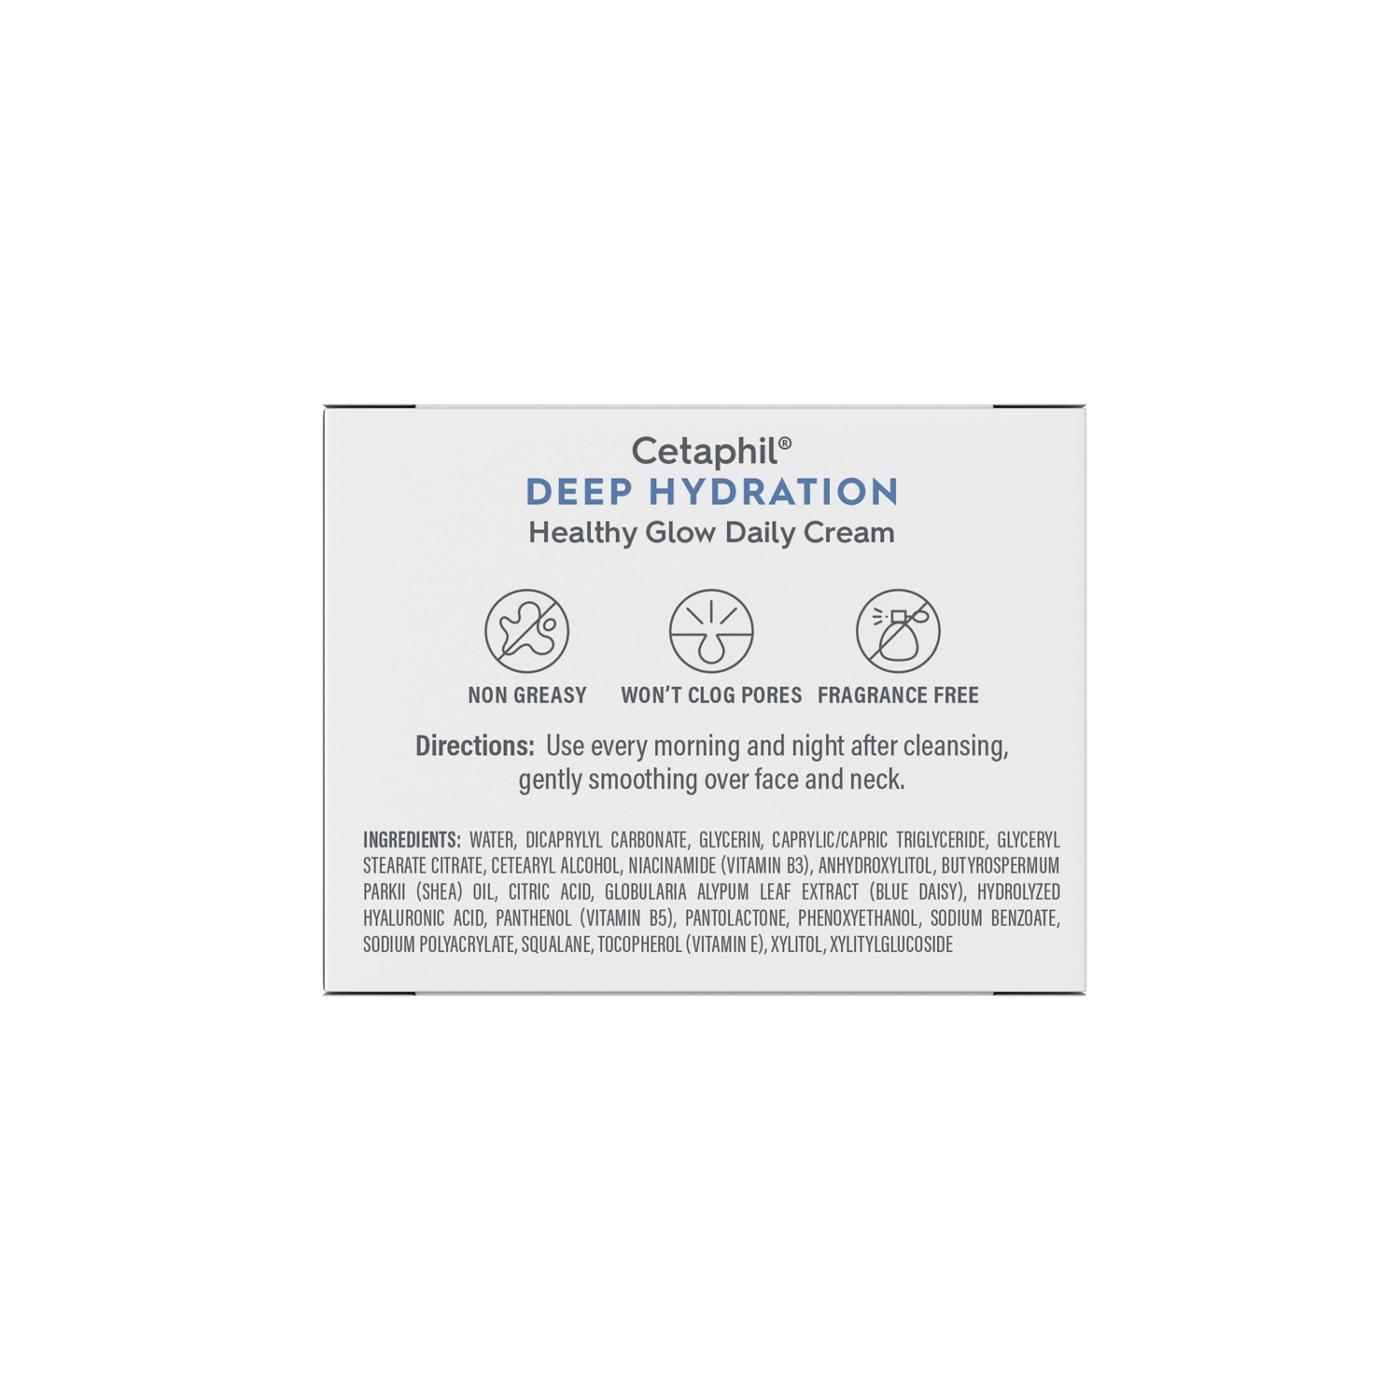 Cetaphil Deep Hydration Healthy Glow Daily Cream; image 7 of 8